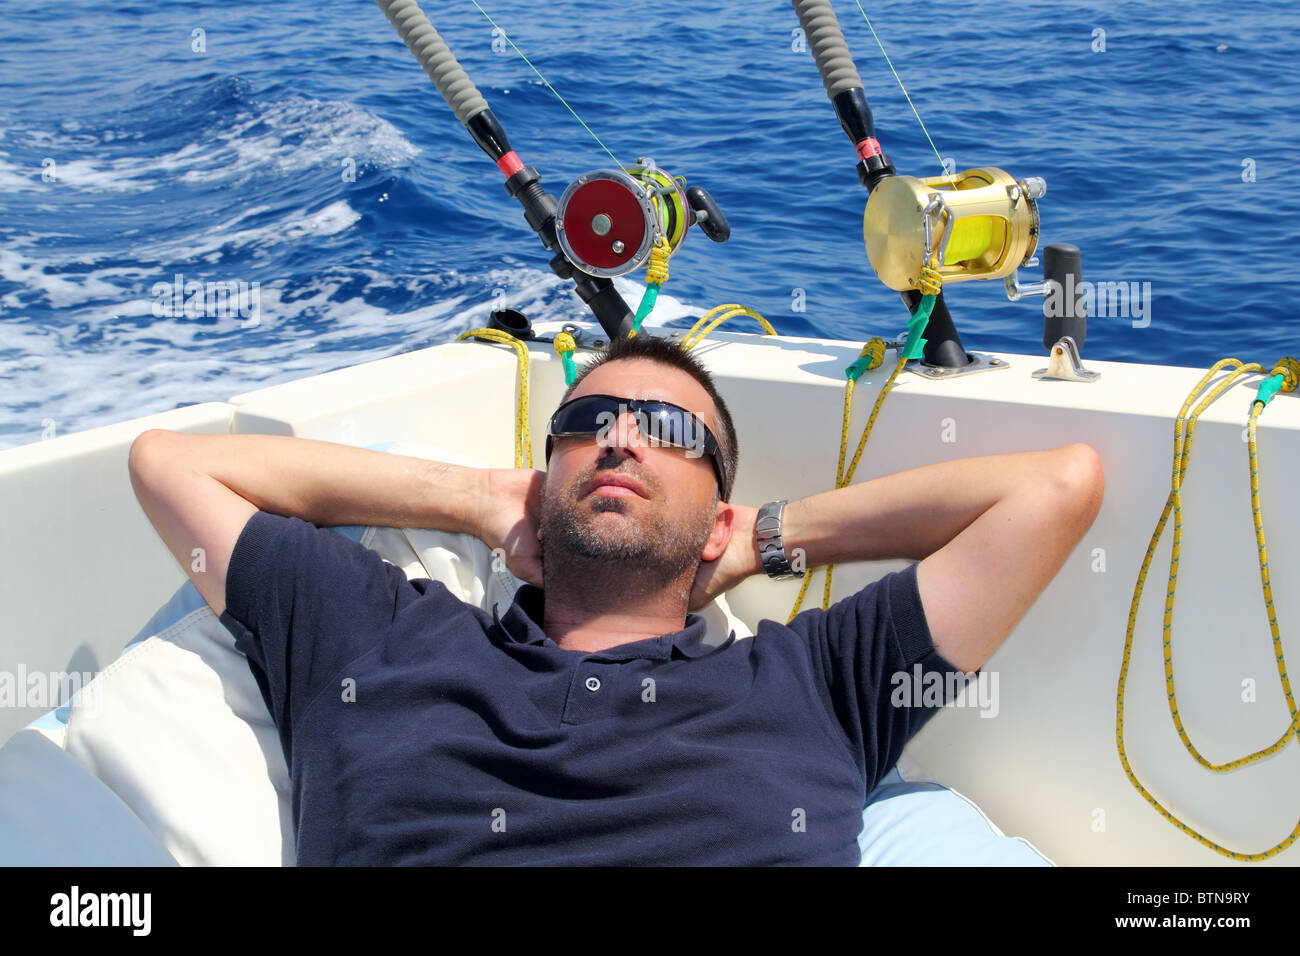 Sailor man fishing resting in boat summer vacation blue sea Stock Photo